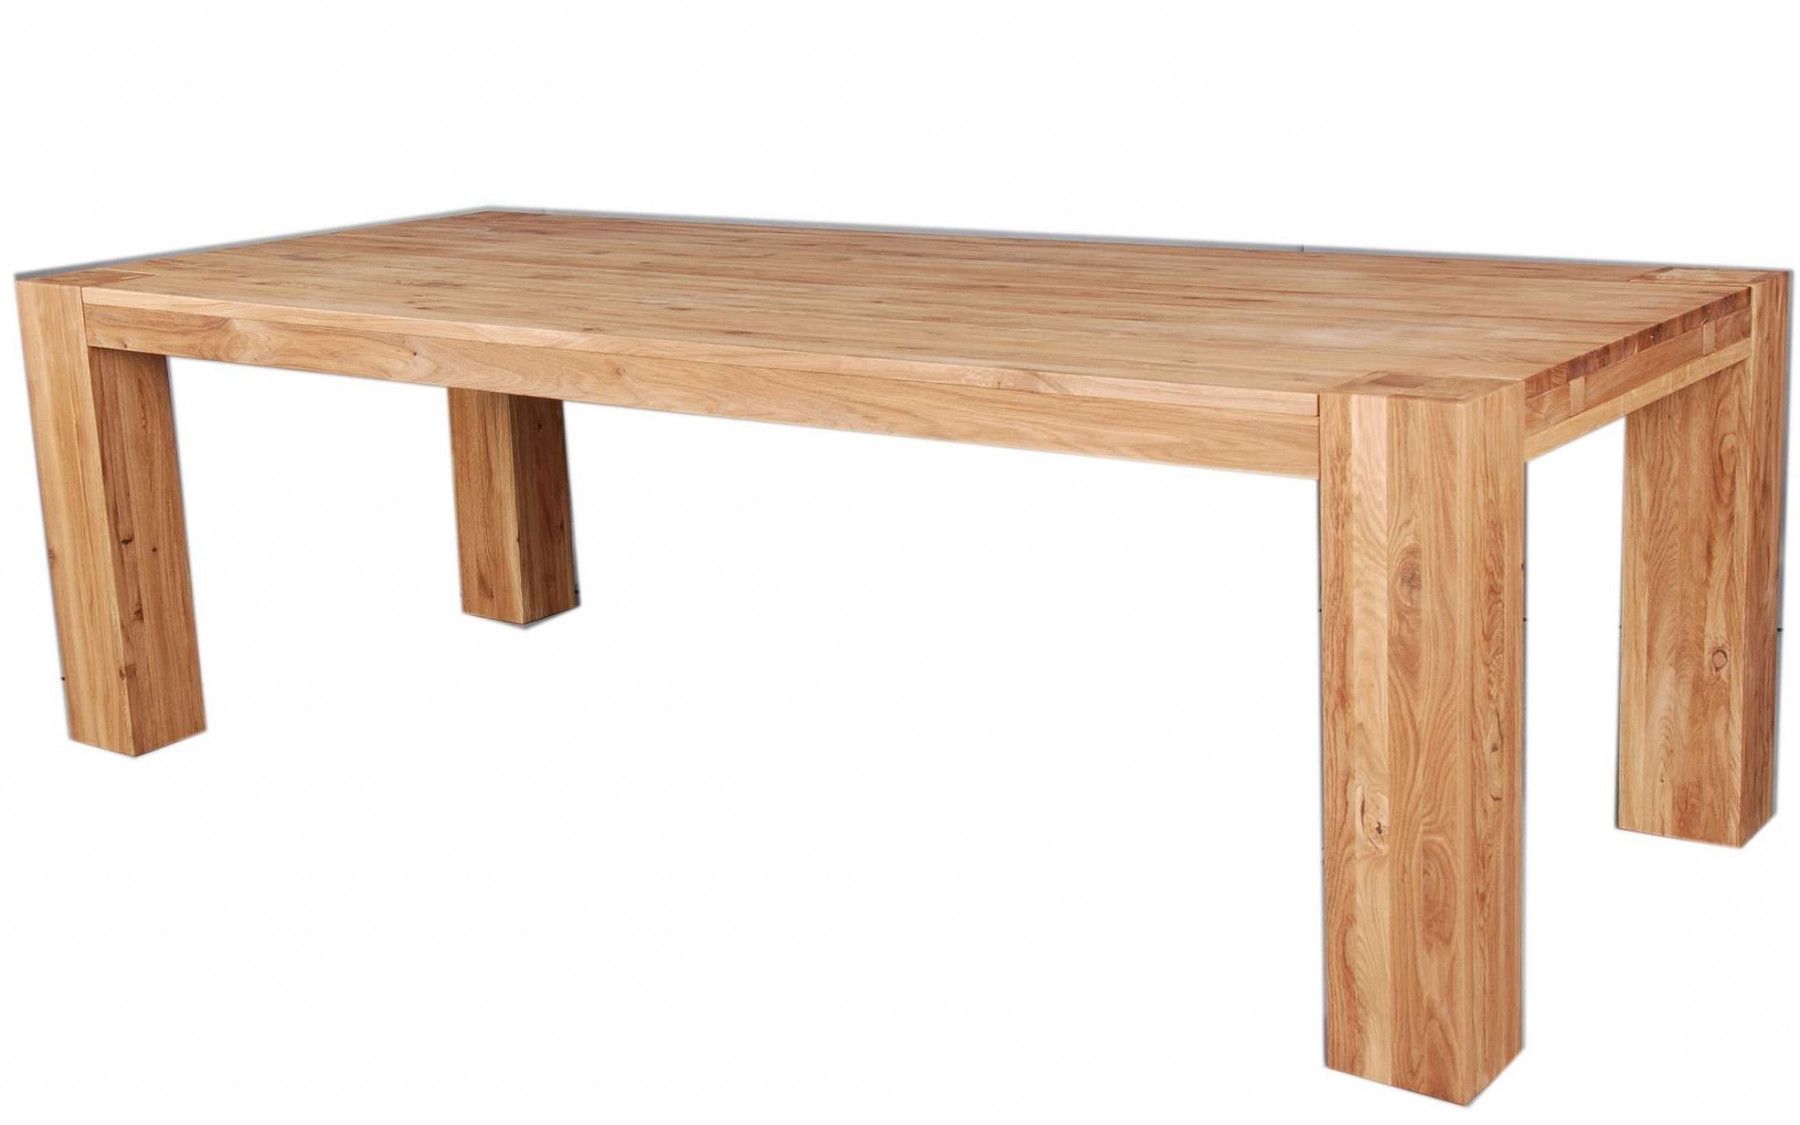 Massive Rustic Solid Oak Dining Tableclemence Richard Within Famous Solid Oak Dining Tables (View 4 of 25)